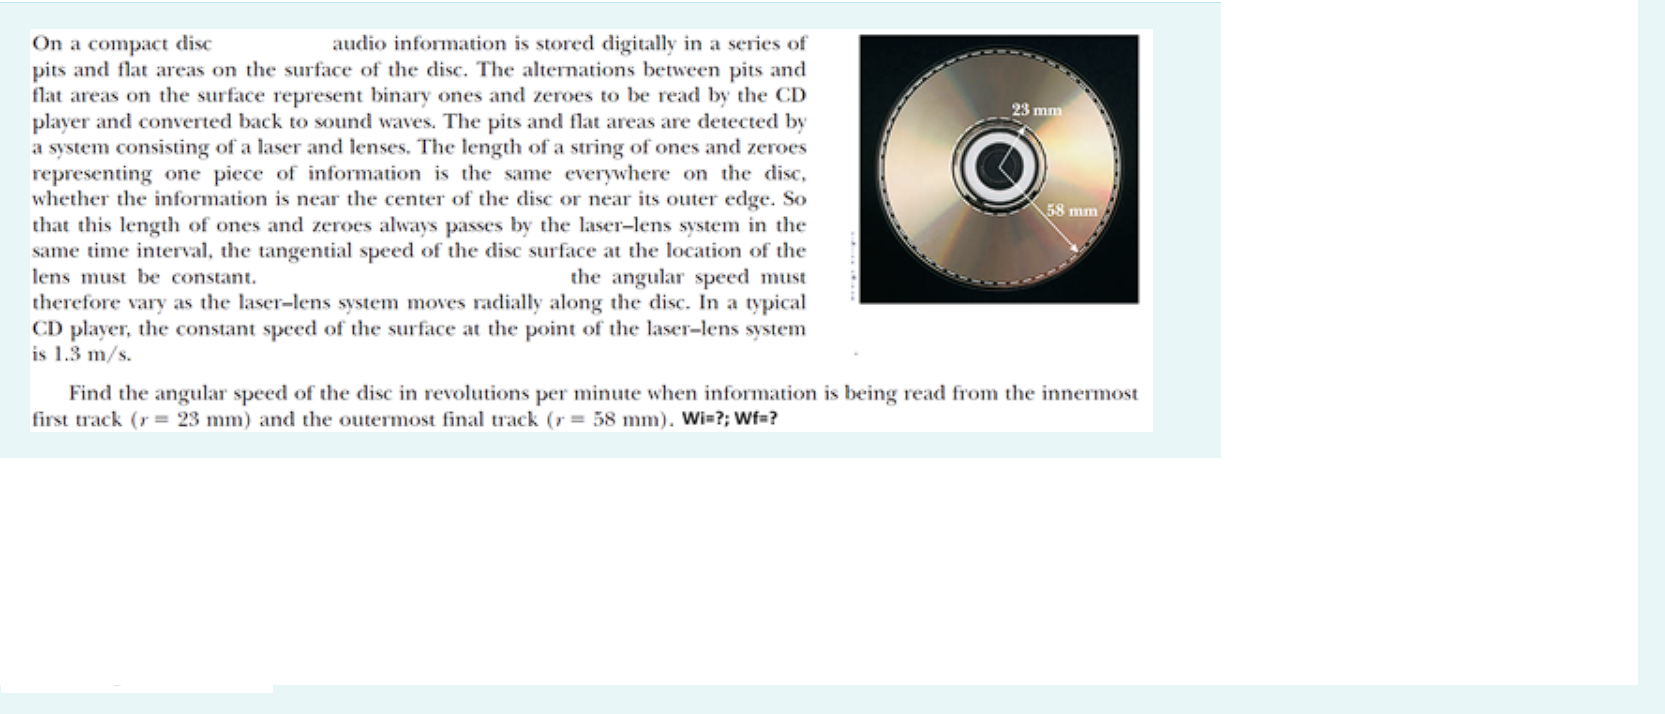 On a compact disc audio information is stored digitally in a series of pits and flat areas on the surface of